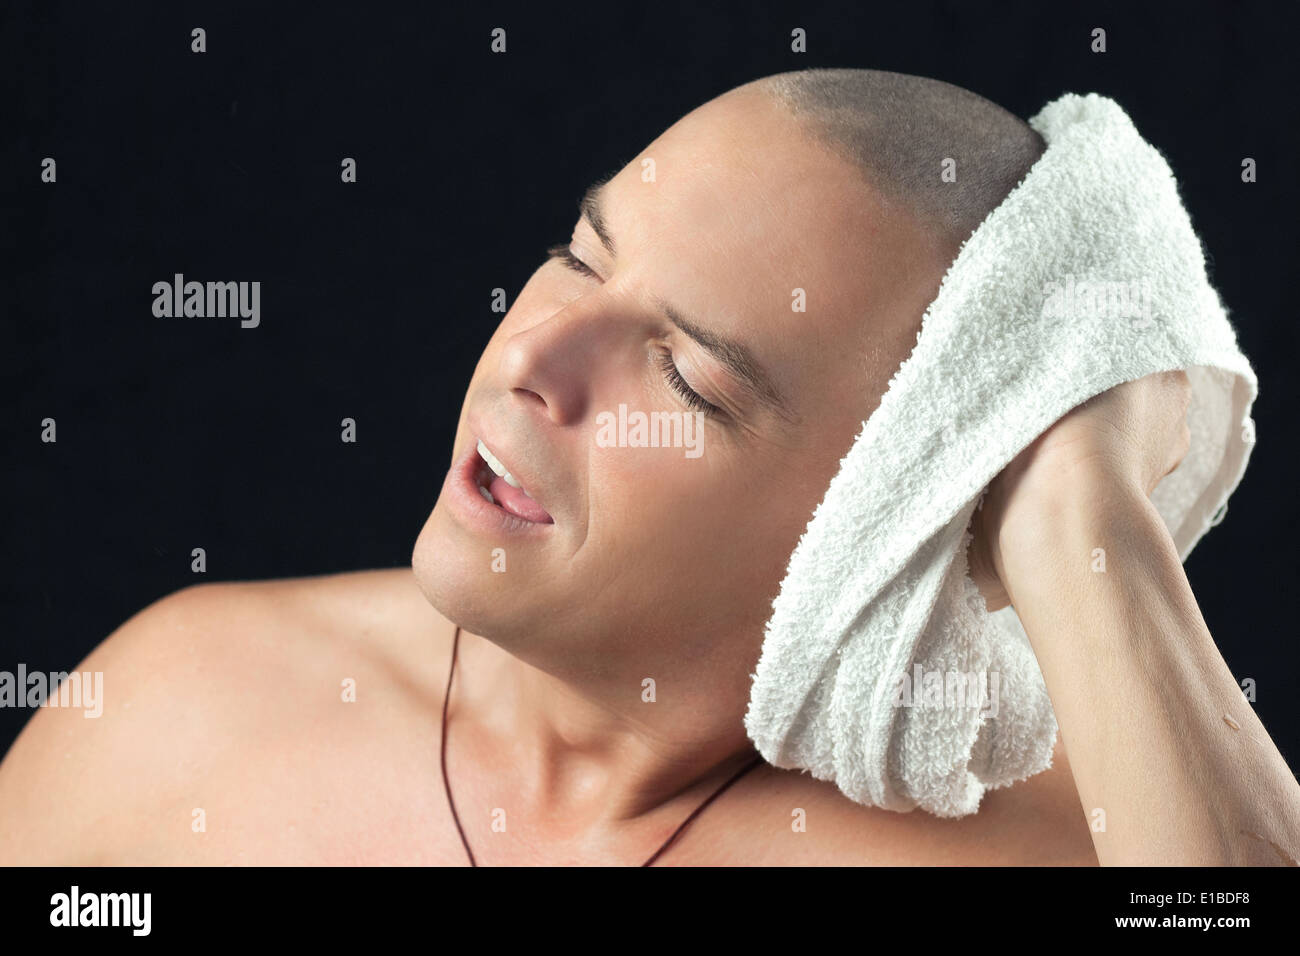 Close-up of a man towel drying his newly shaved head. Stock Photo